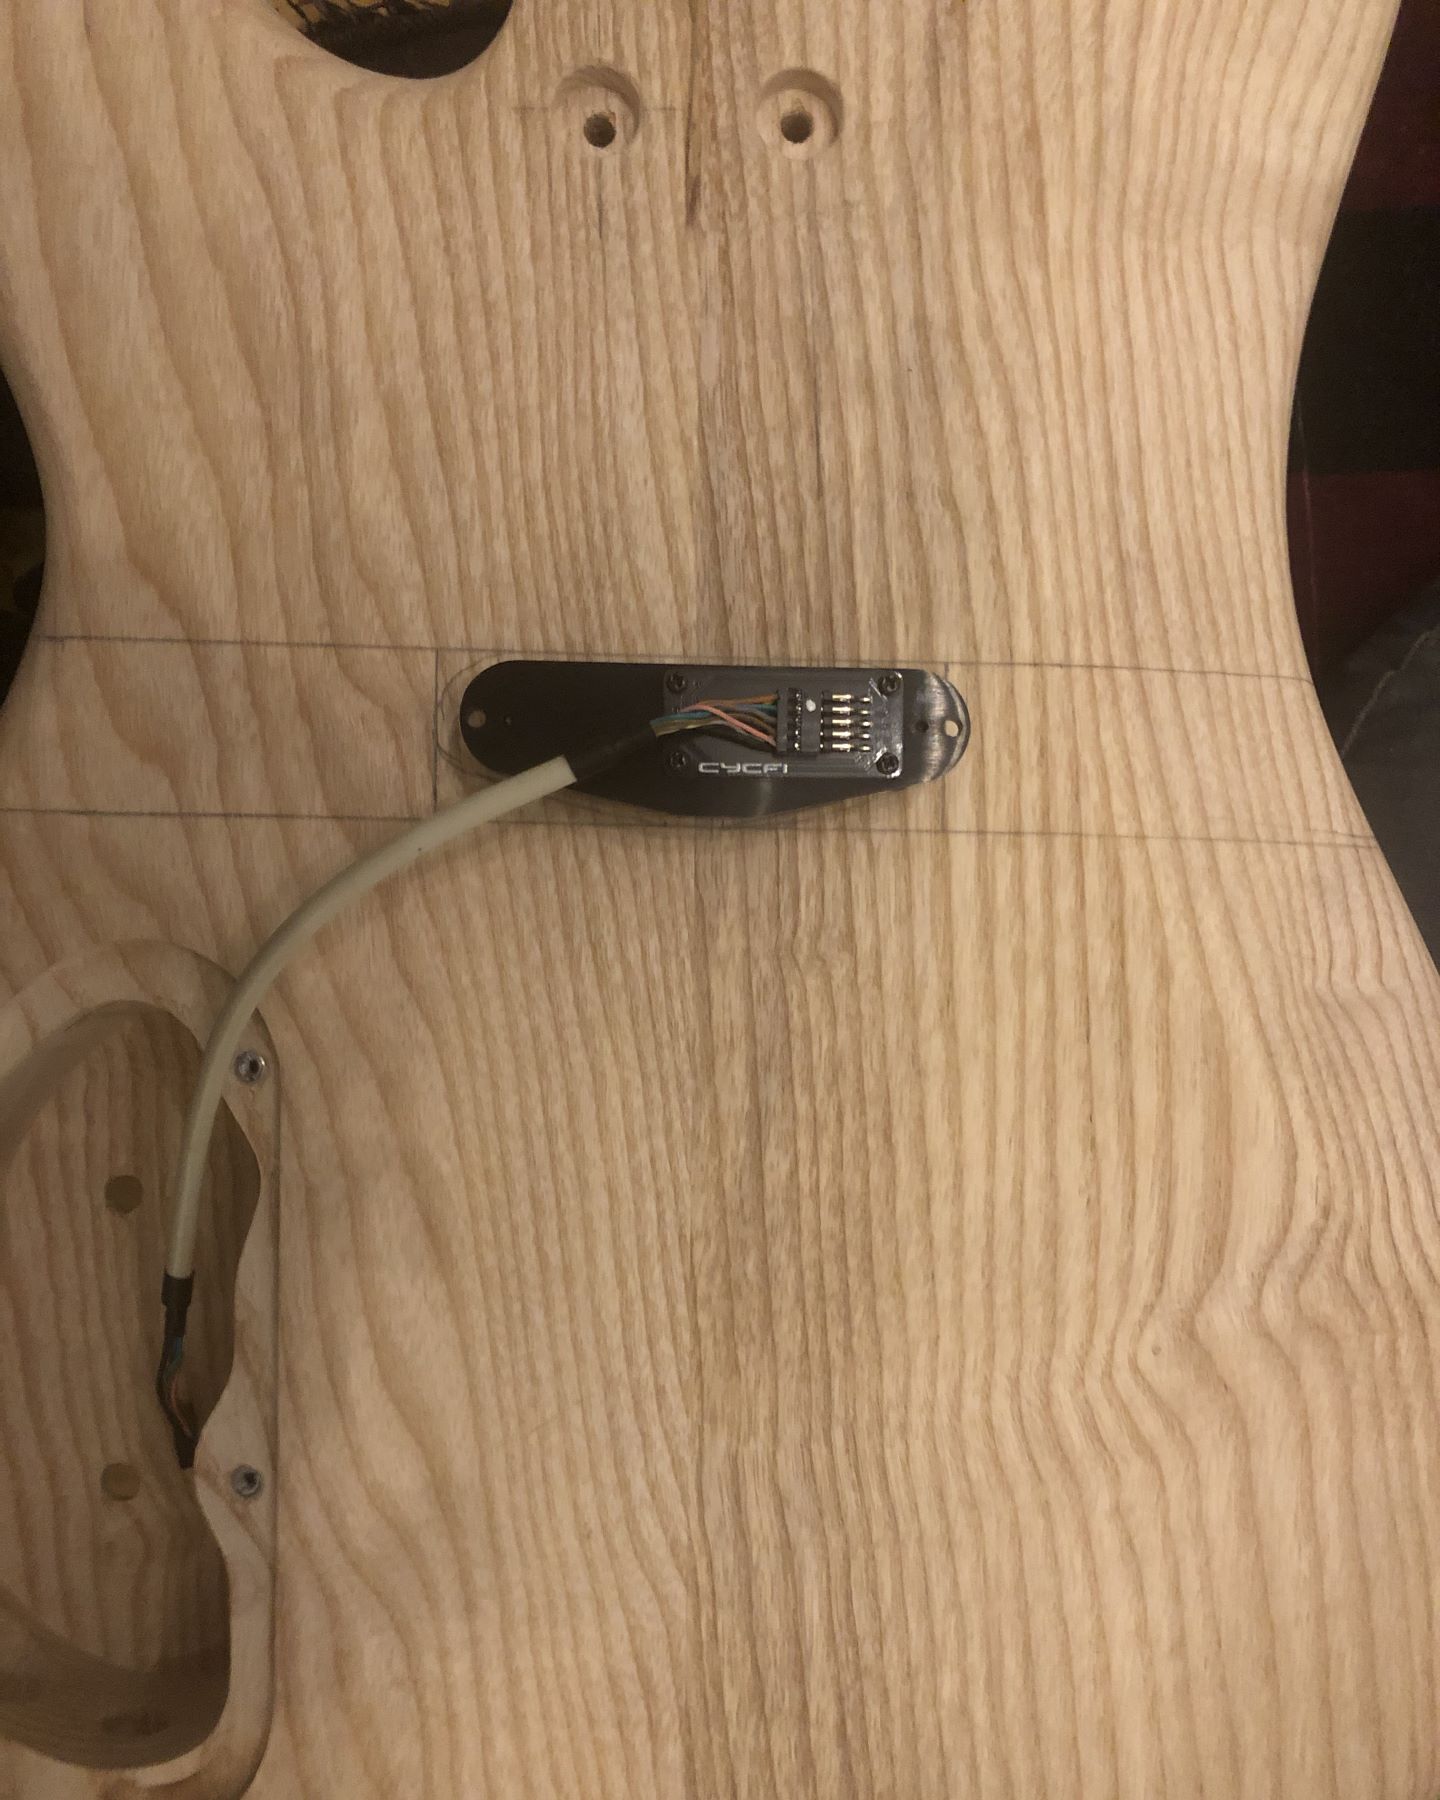 Back side of the bass guitar body shown in the previous photo, with a pickup lying on the back with pencil lines marking the approximate position of the pickup cavity on the front. The 10-conductor cable is attached to the pickup with the other end lying on the rear-routed electronics cavity.